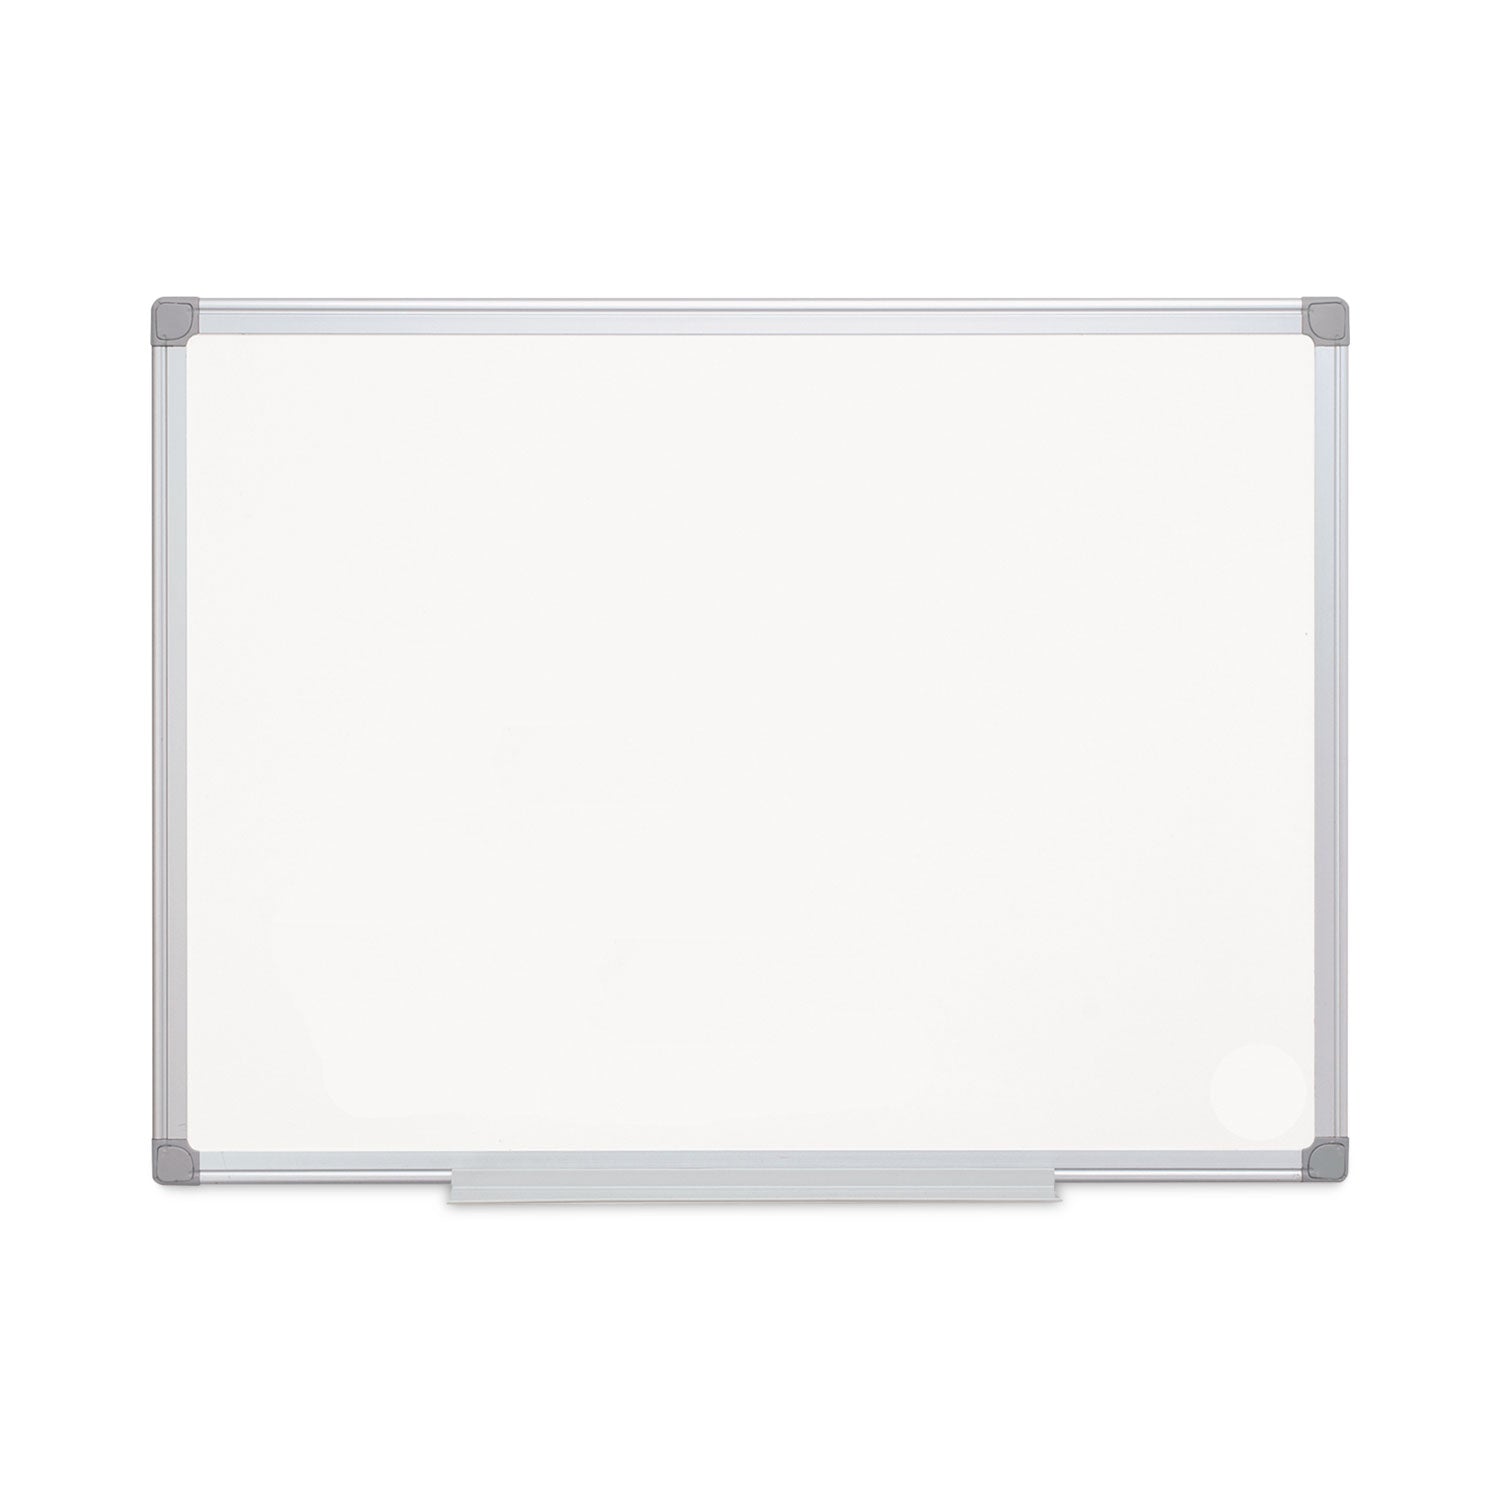 Earth Gold Ultra Magnetic Dry Erase Boards, 36 x 48, White Surface, Silver Aluminum Frame - 